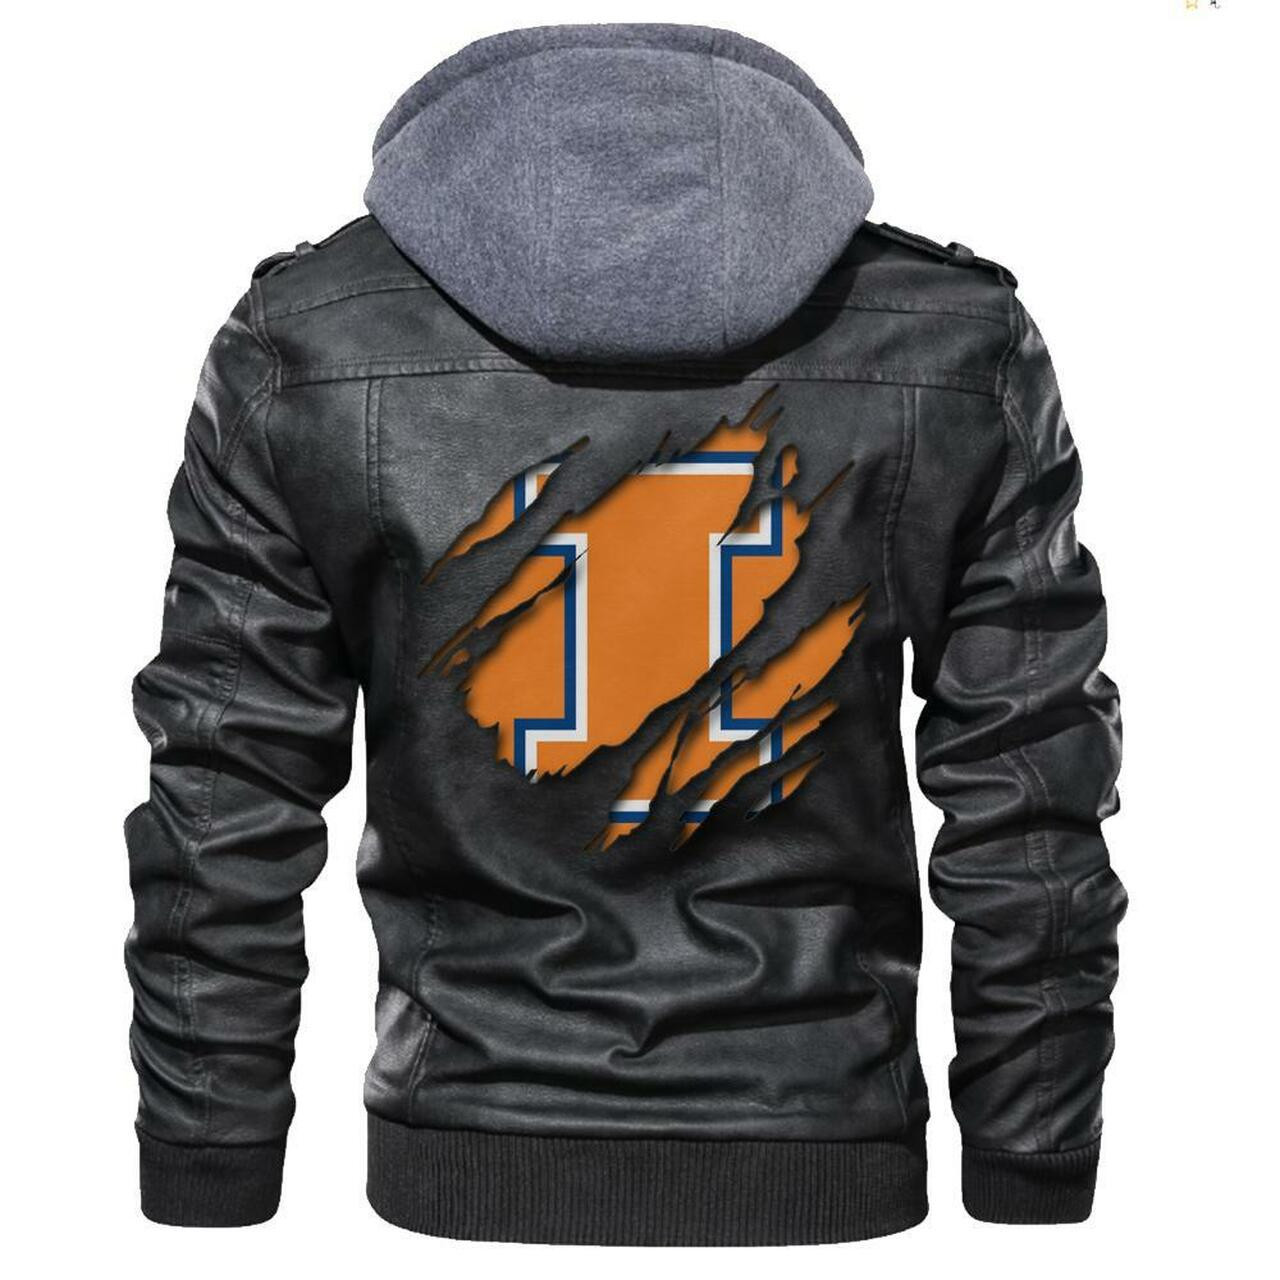 If you're looking for a trendy shirt hoodie, check out below 9